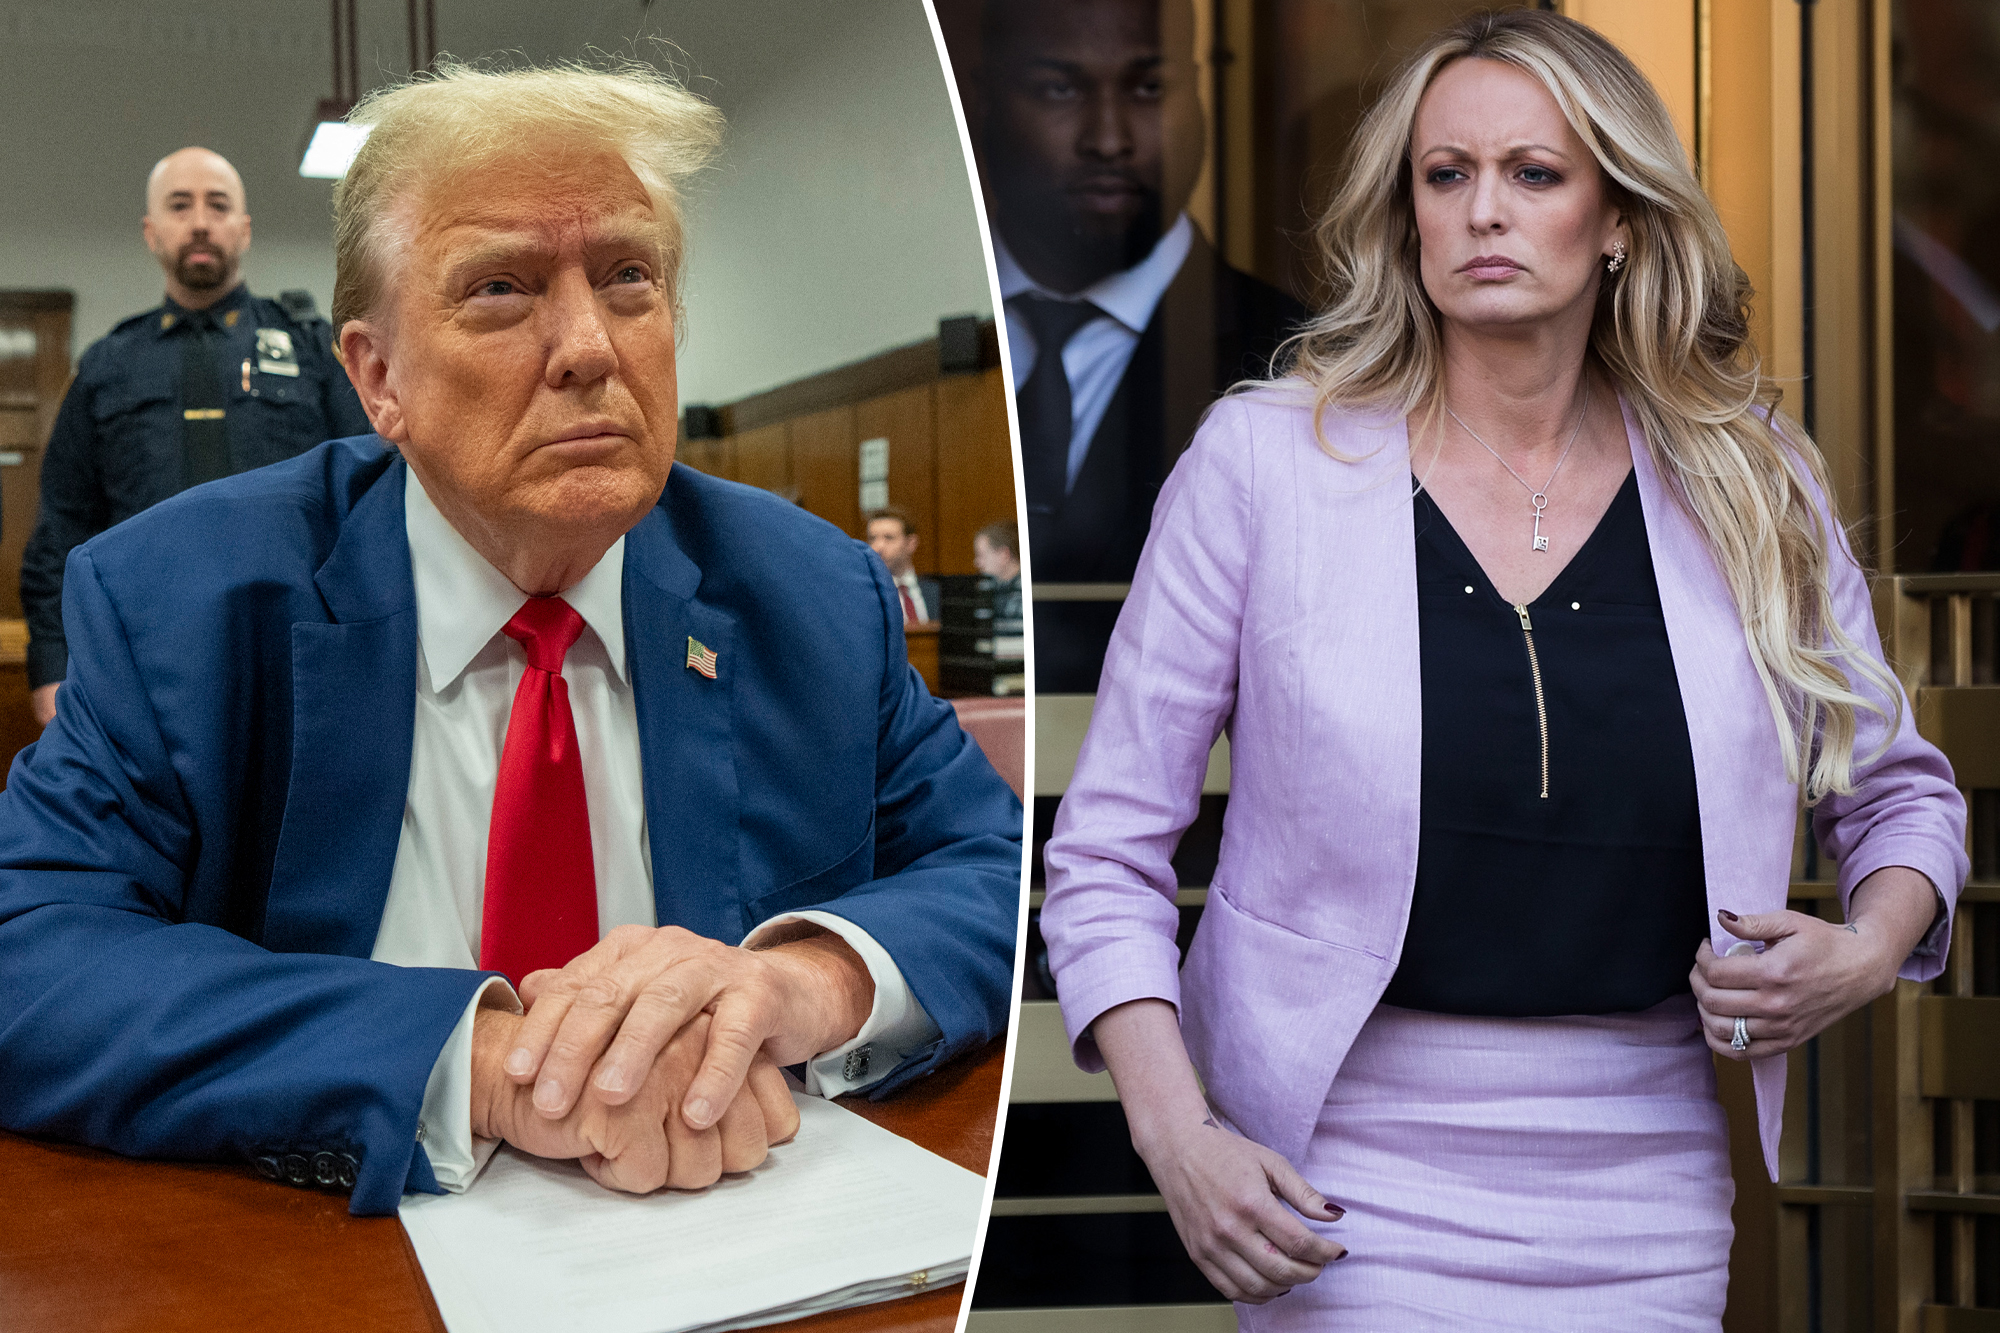 Stormy Daniels reveals she spanked Donald Trump with a magazine during hush money trial